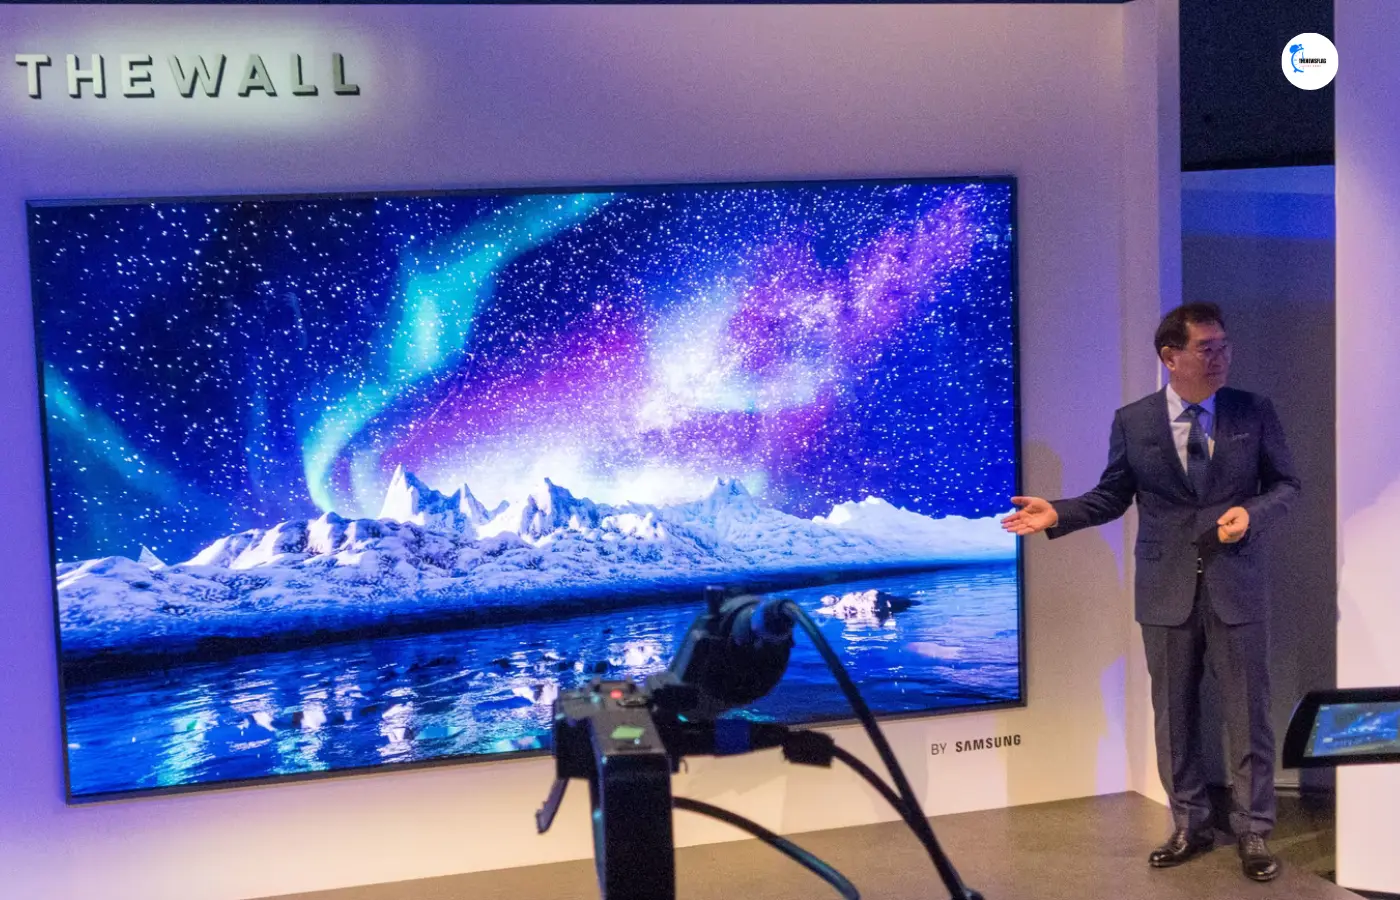 Samsung has unveiled a 110-inch MicroLED TV that is a jaw-dropping beast